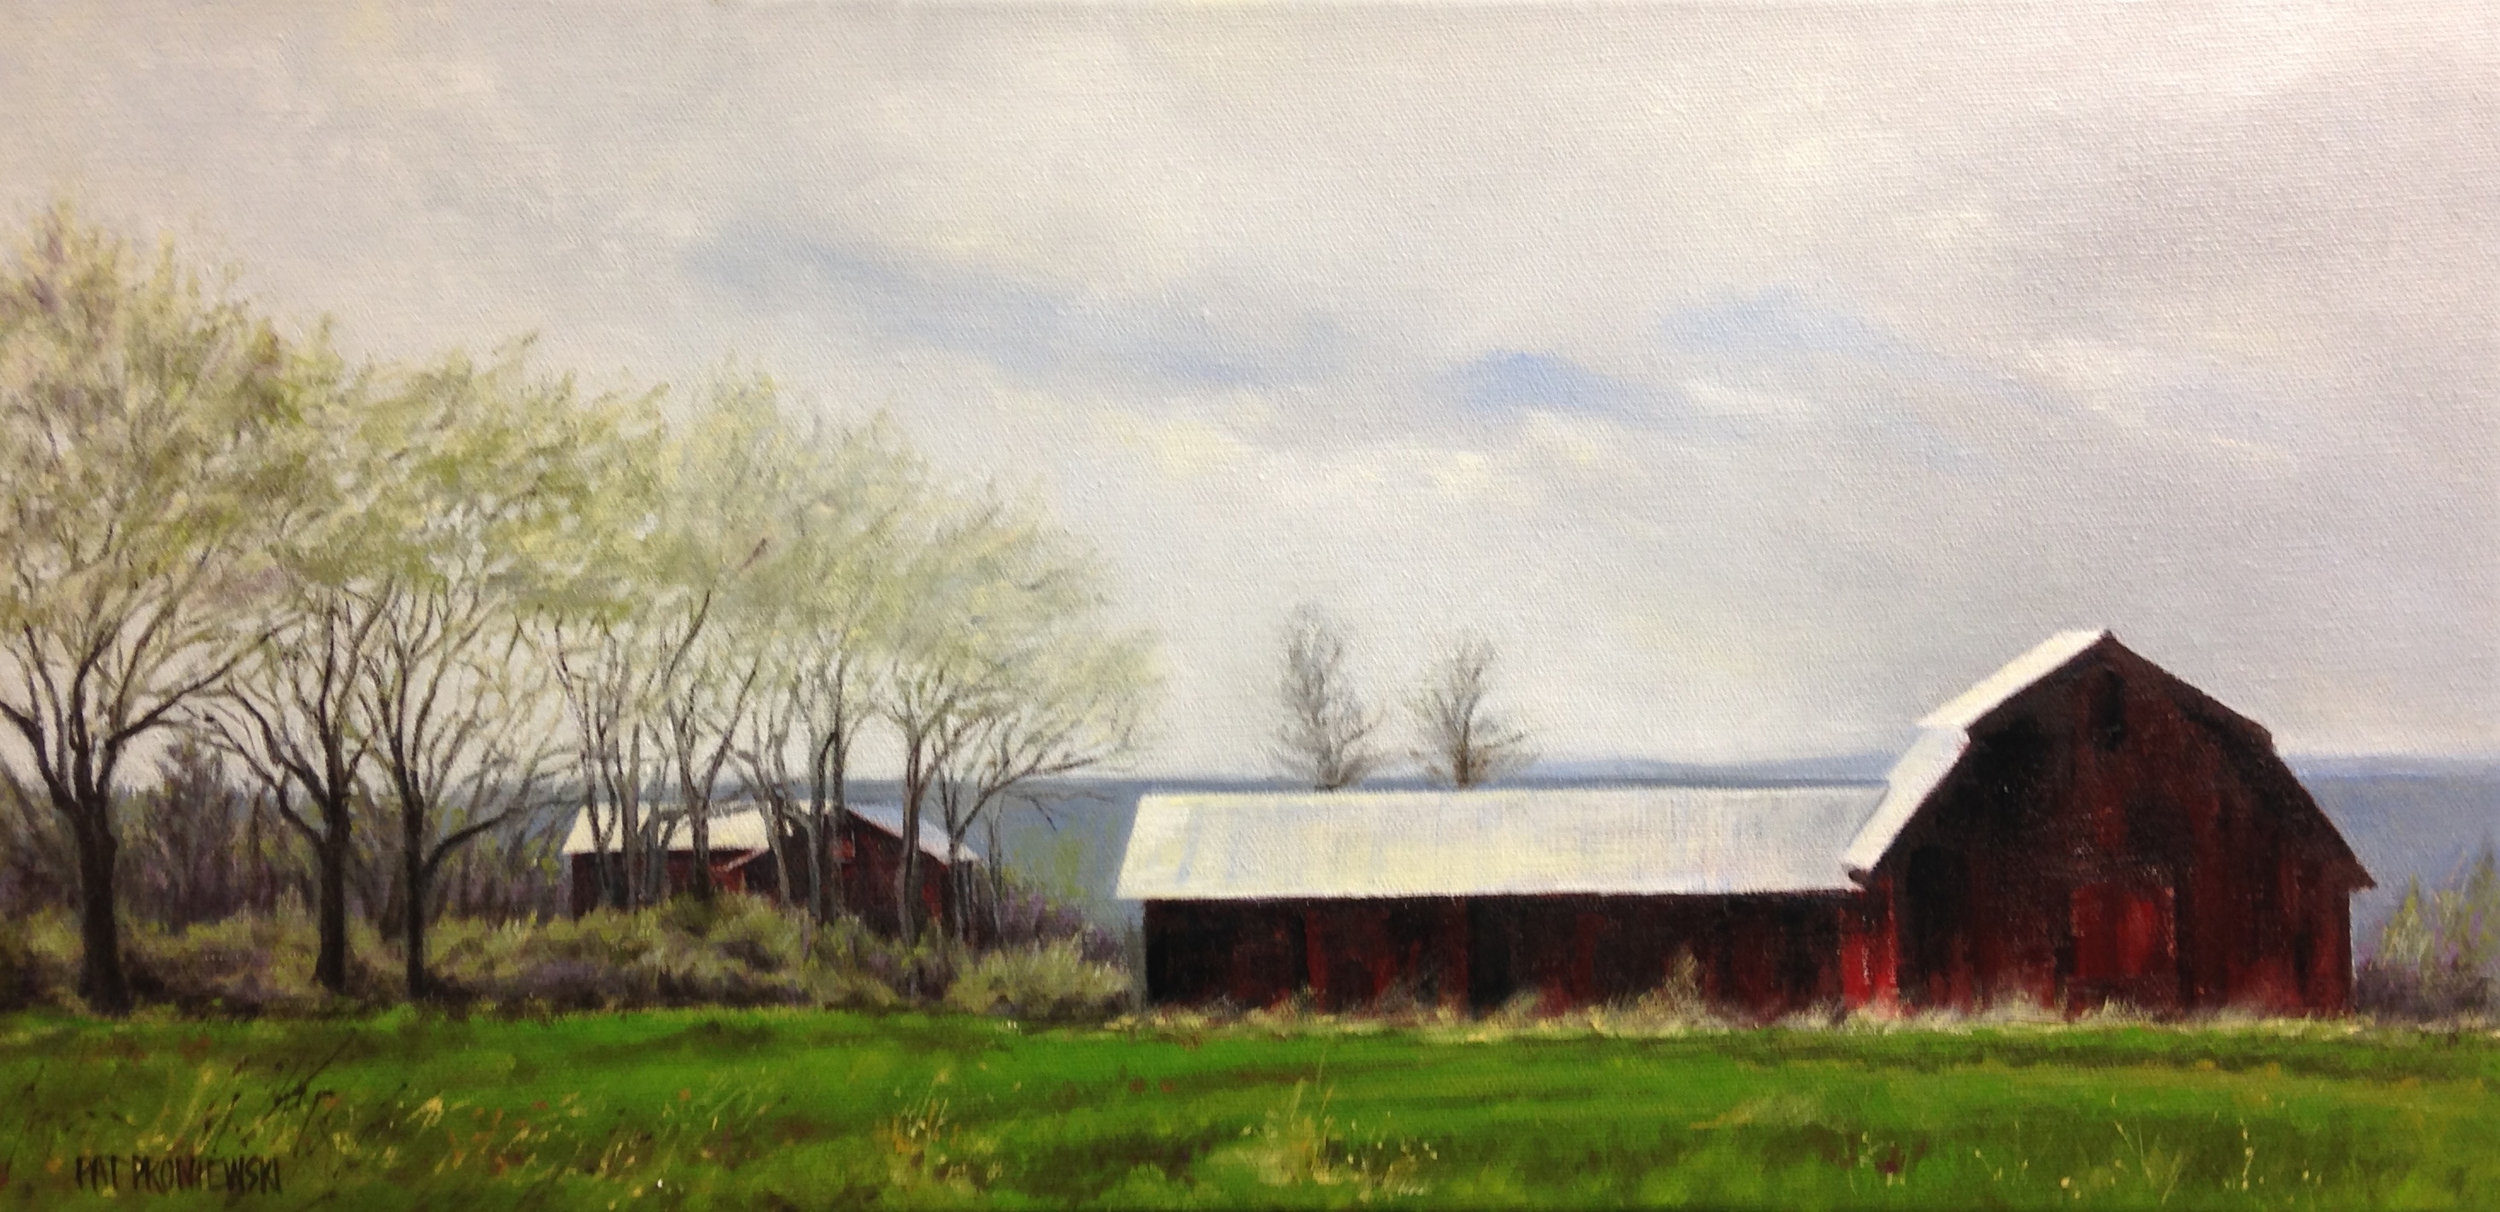 The Red Barn, Finger Lakes